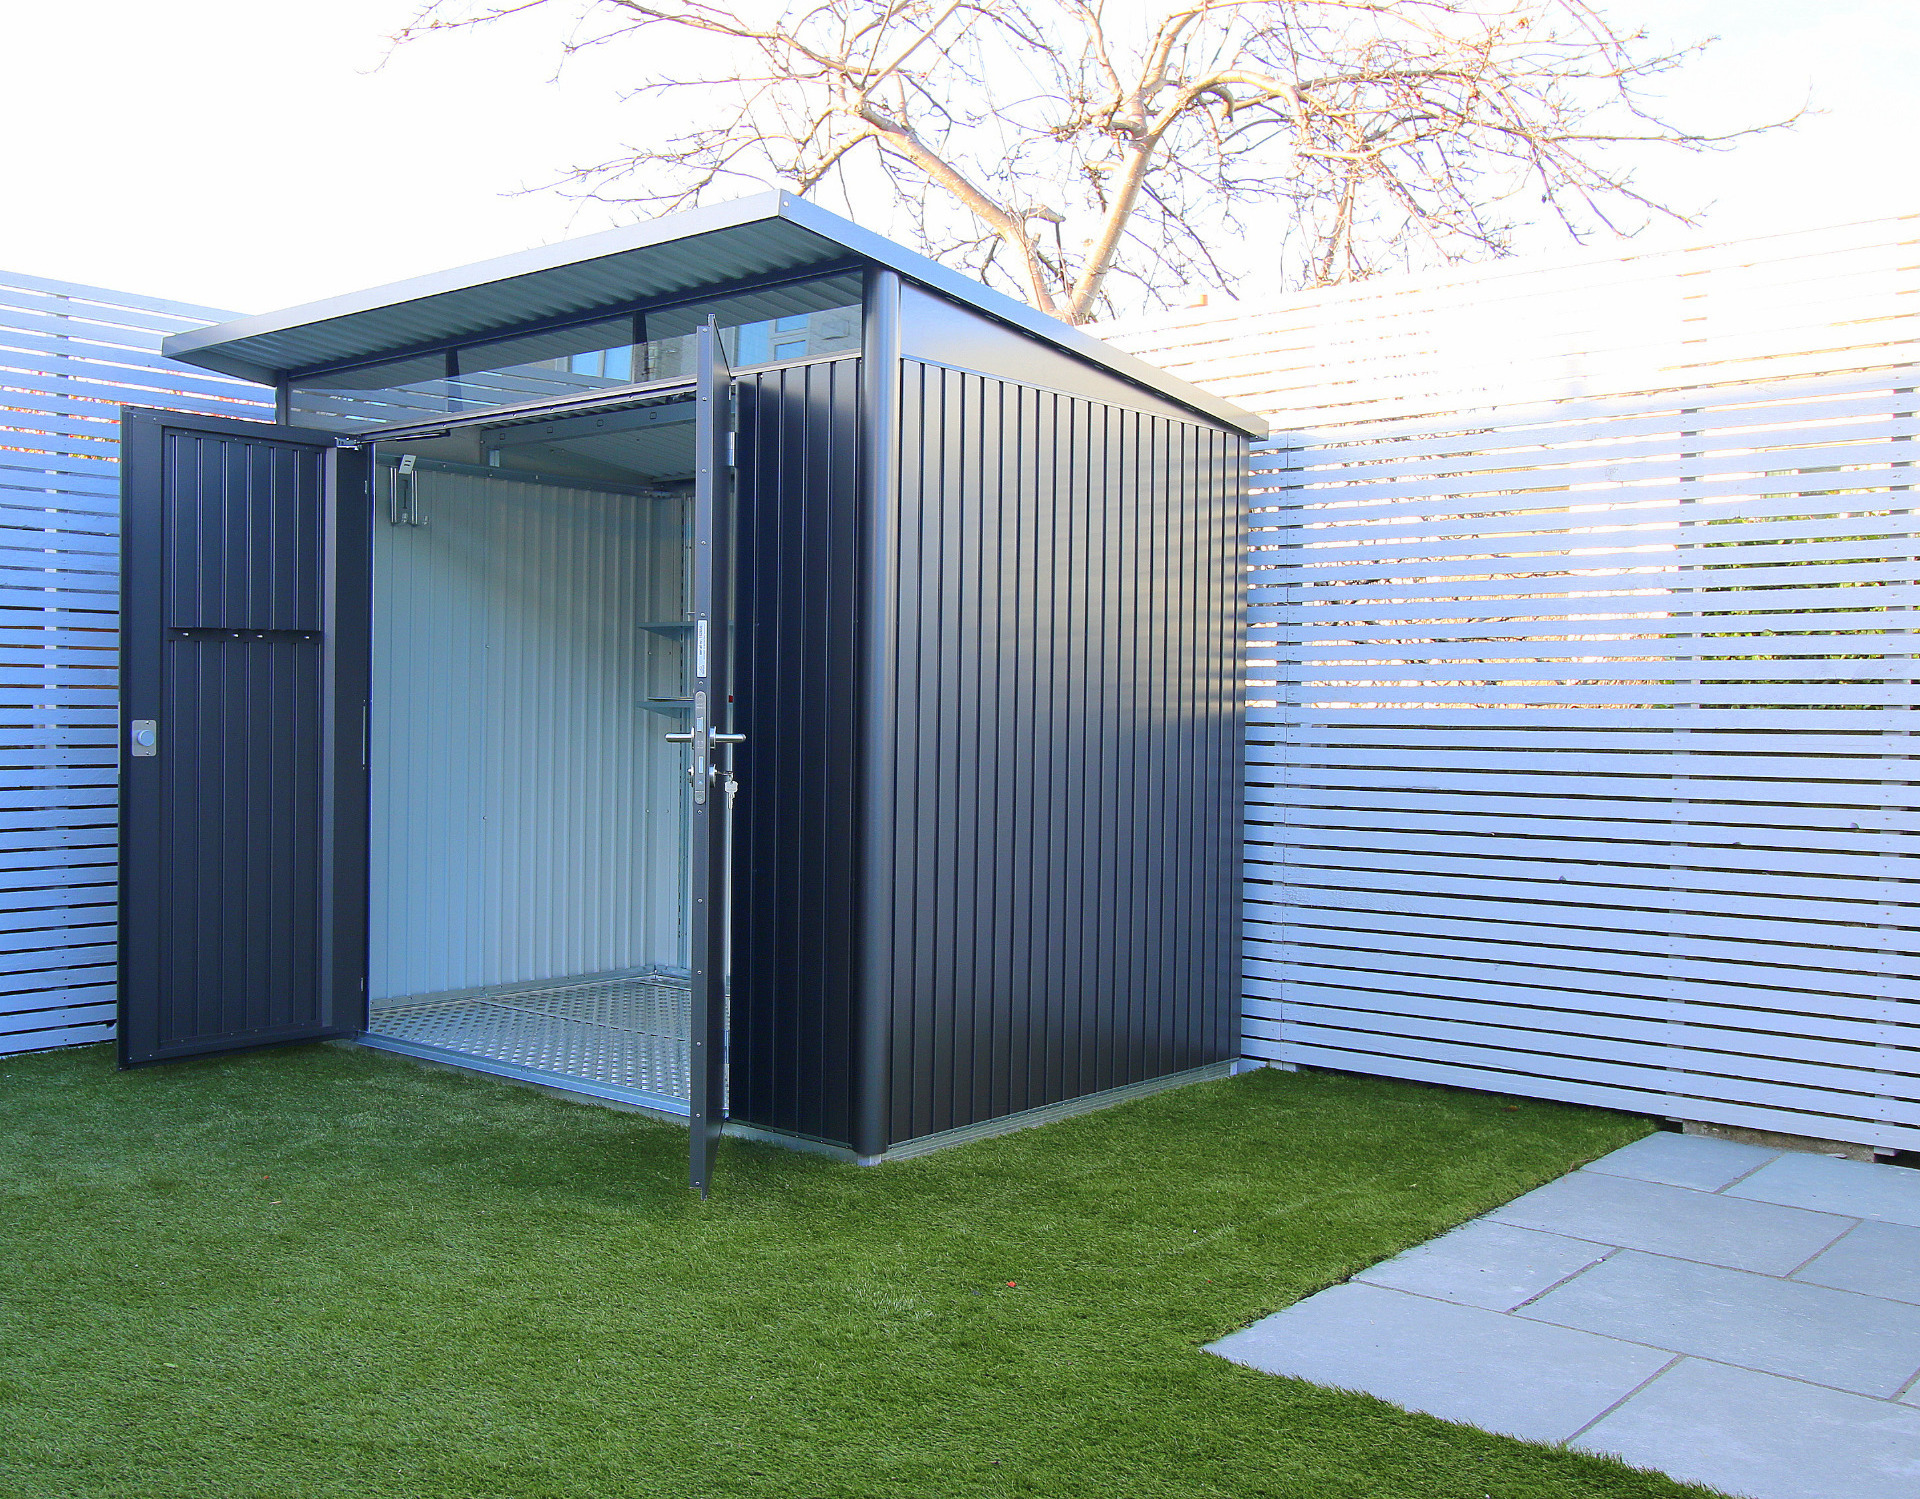 The Biohort AvantGarde A5 in metallic dark grey with double doors is contemporary garden shed storage at its best. Supplied + Fitted in Templeogue, Dublin 6W  | Owen Chubb Garden Landscapers - Ireland's #1 Biohort Dealer for  Value & Service. Tel 087-2306 128